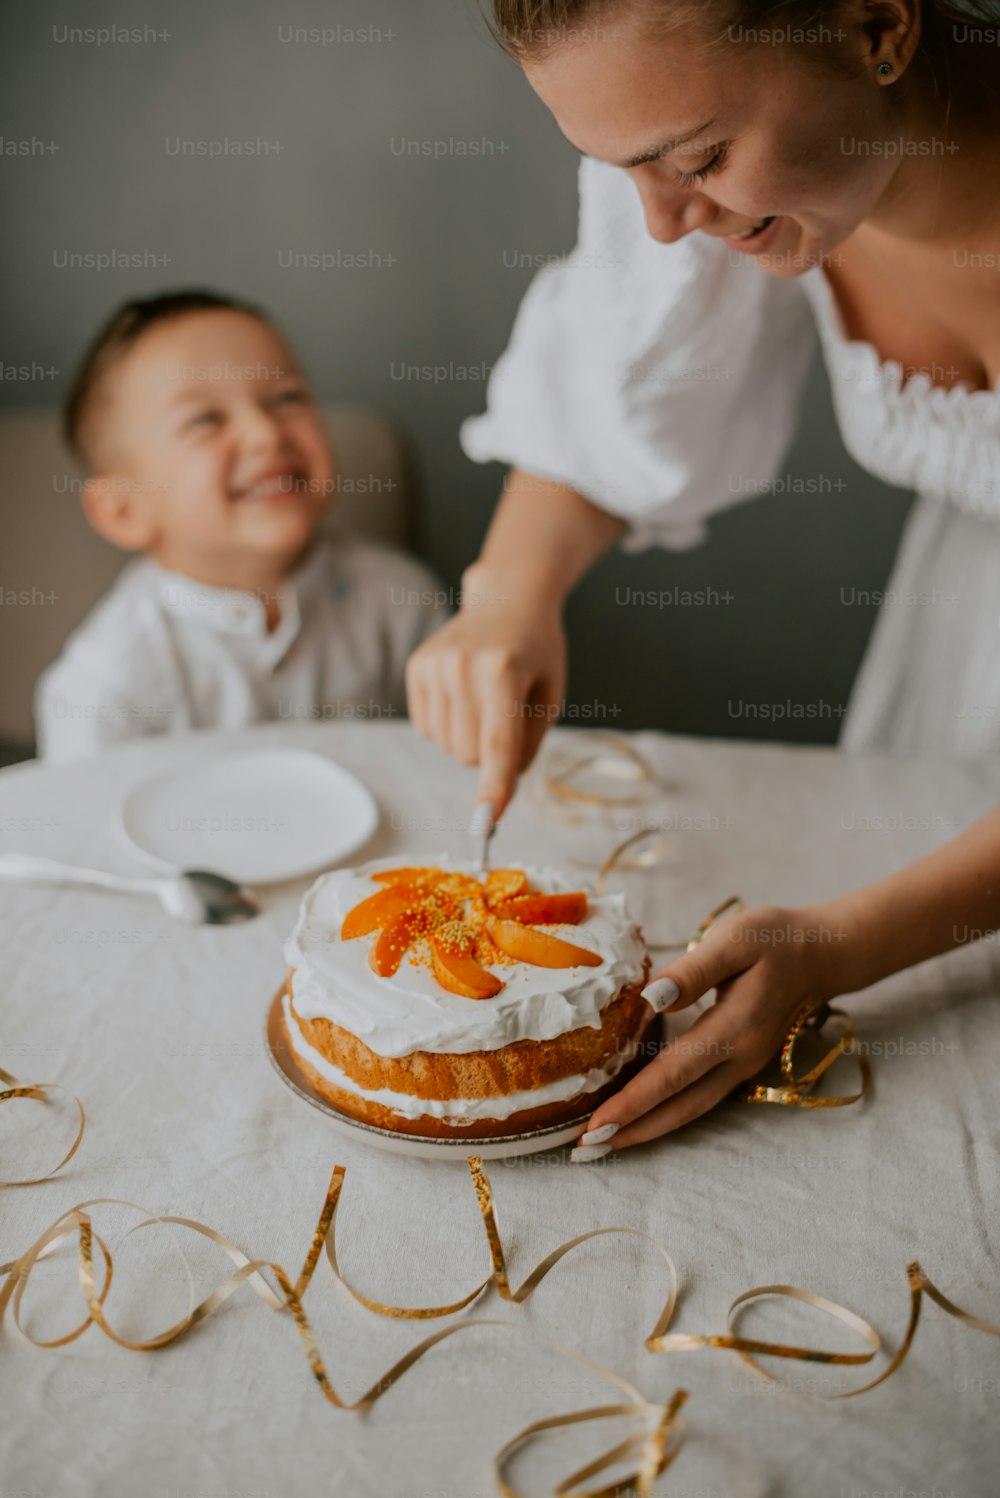 a woman cutting a cake next to a baby